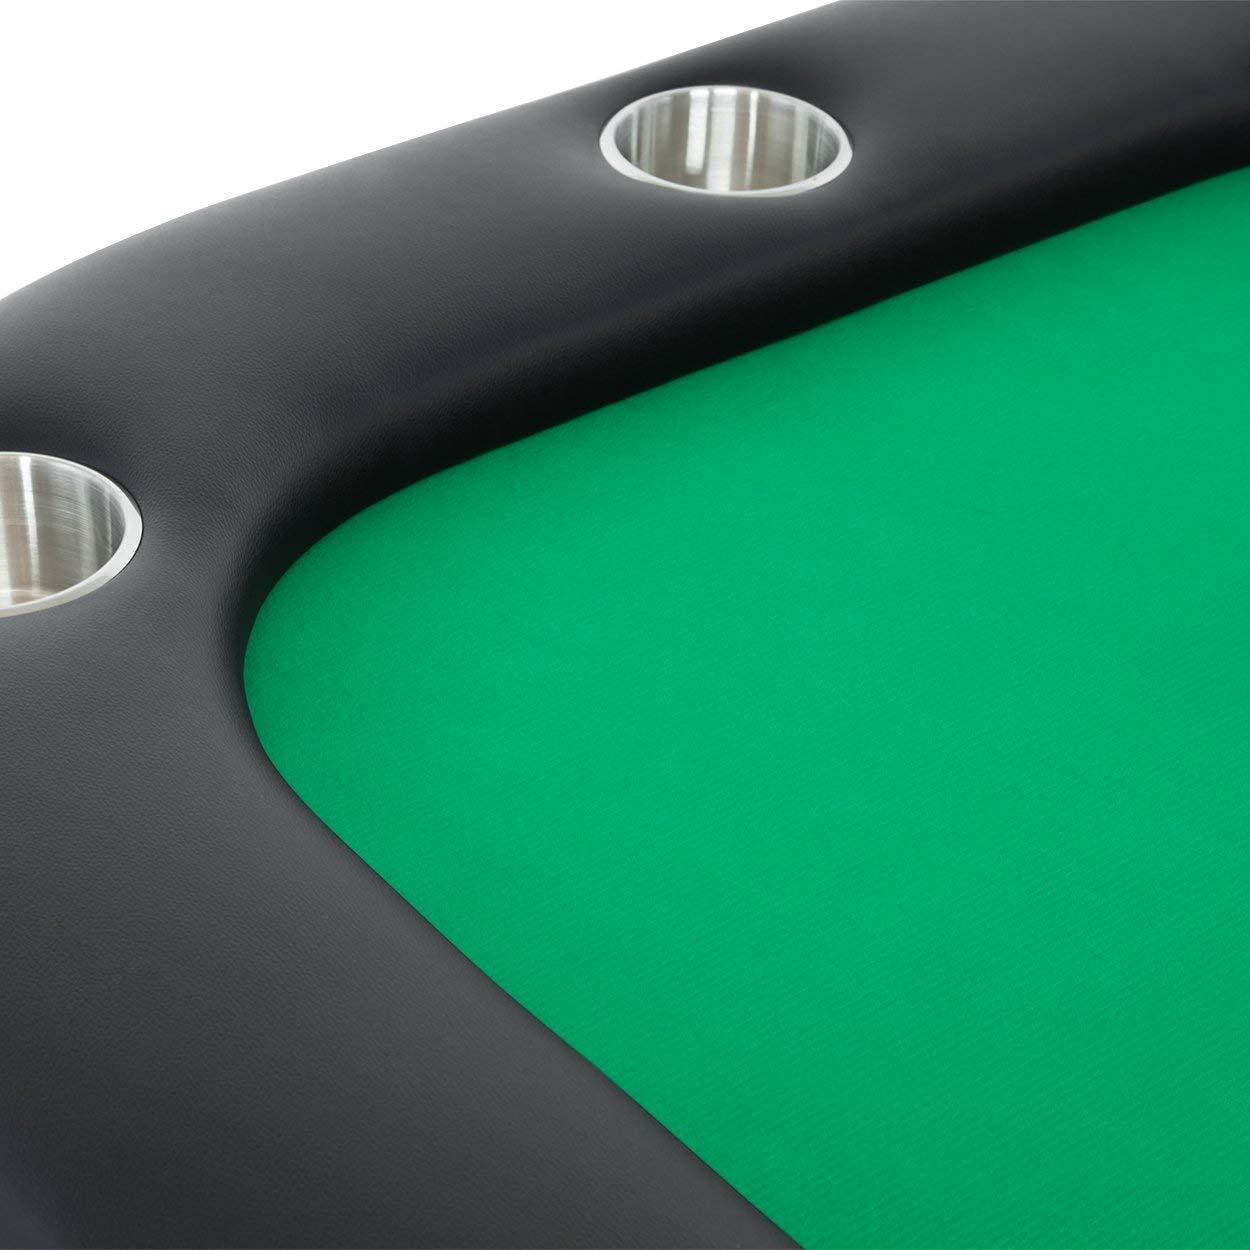 BBO Poker Tables Helmsley Poker Dining Table 8 Person with Dining Top - Just Poker Tables